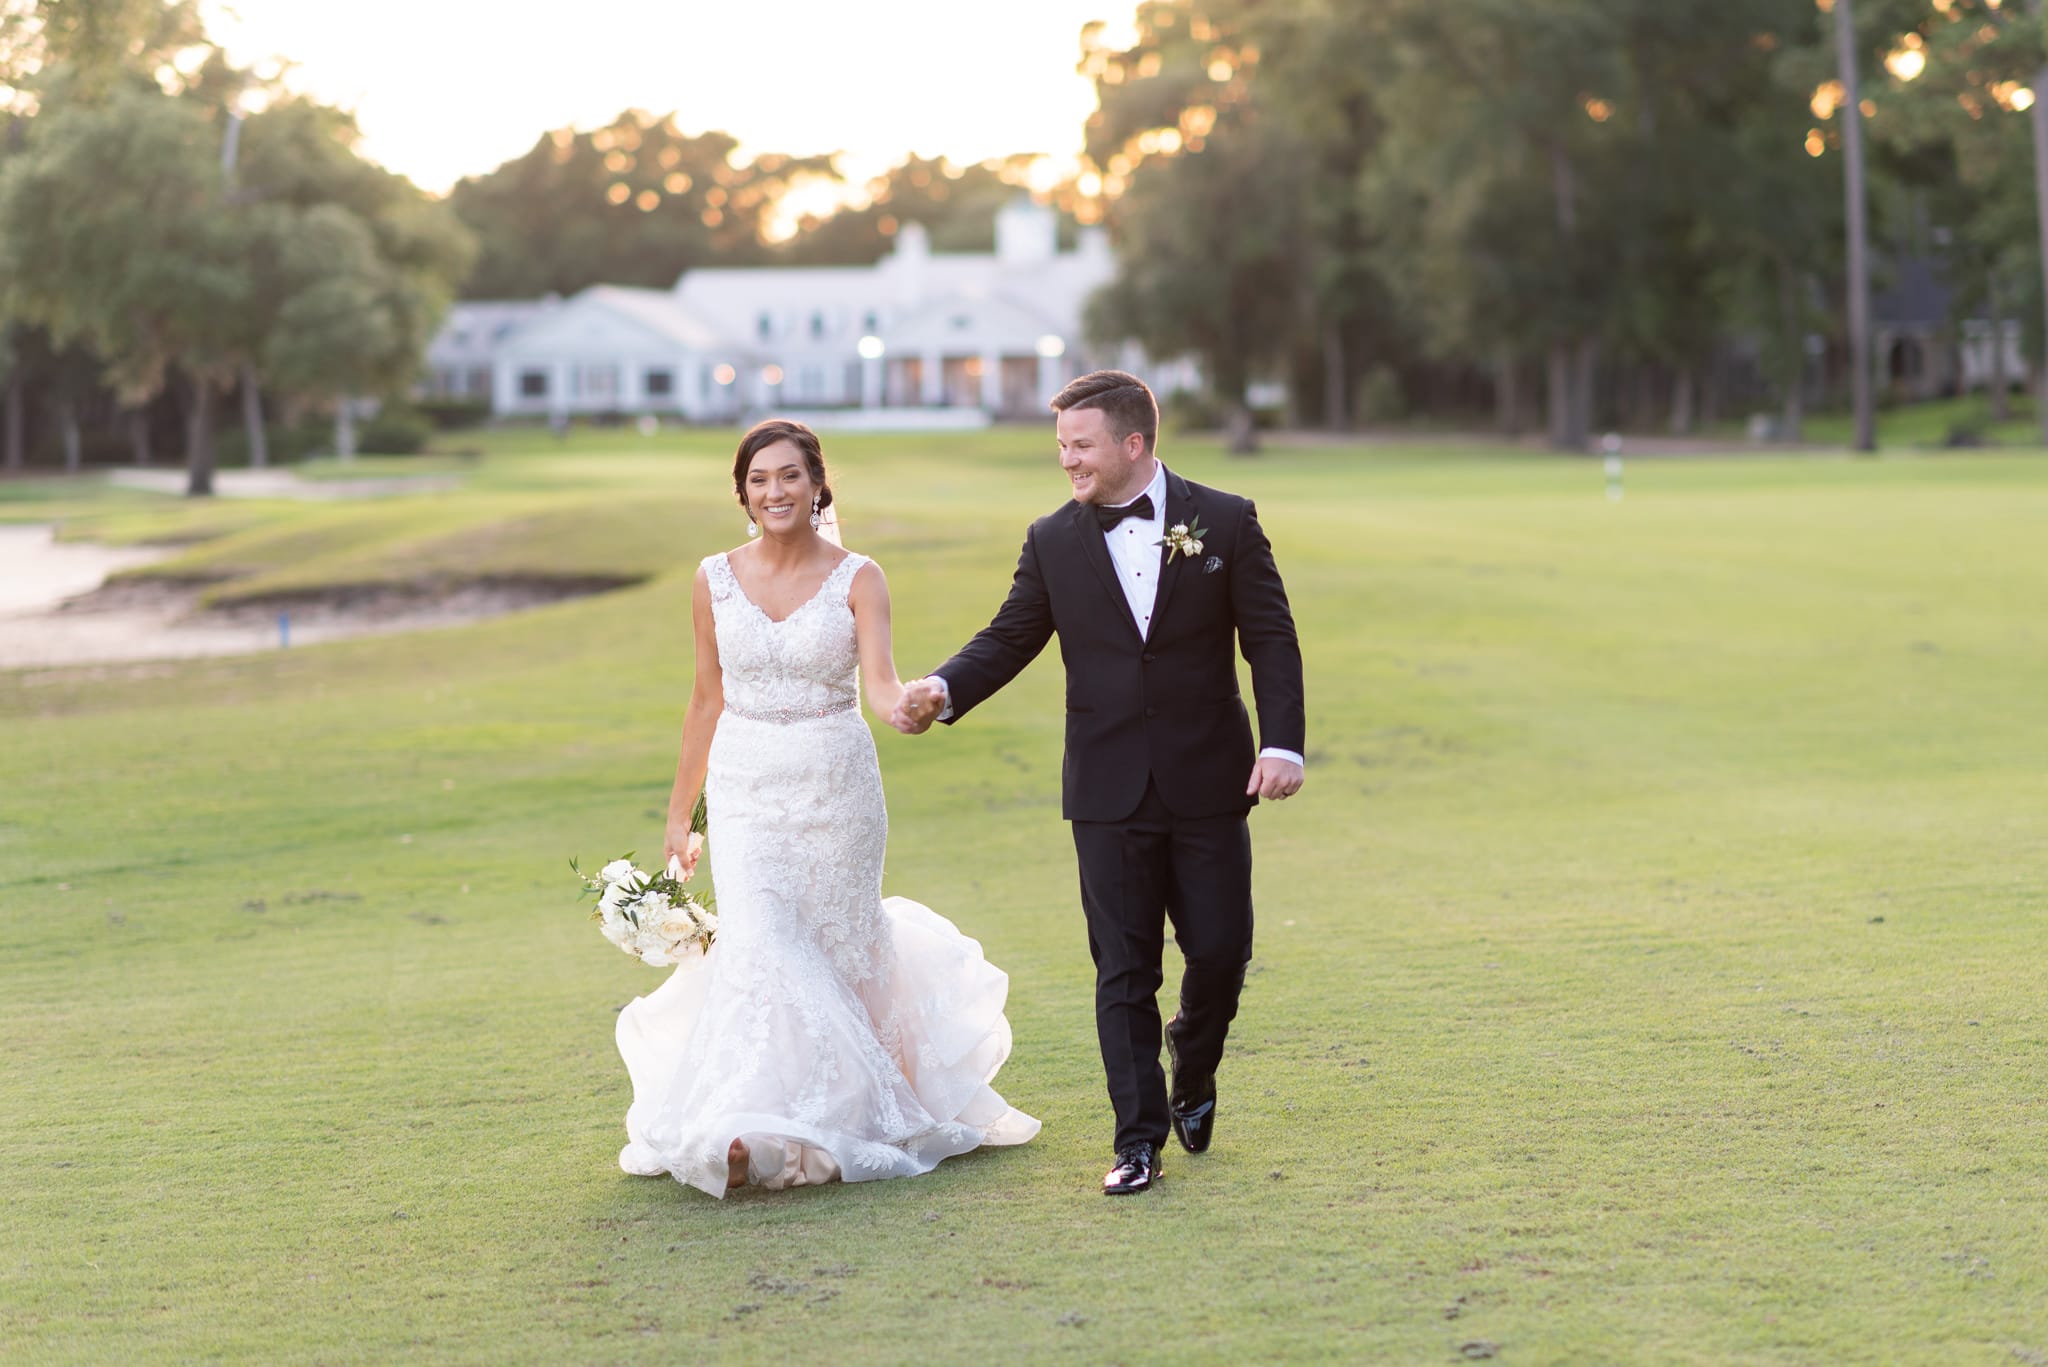 Holding hands walking down the golf course Pawleys Plantation